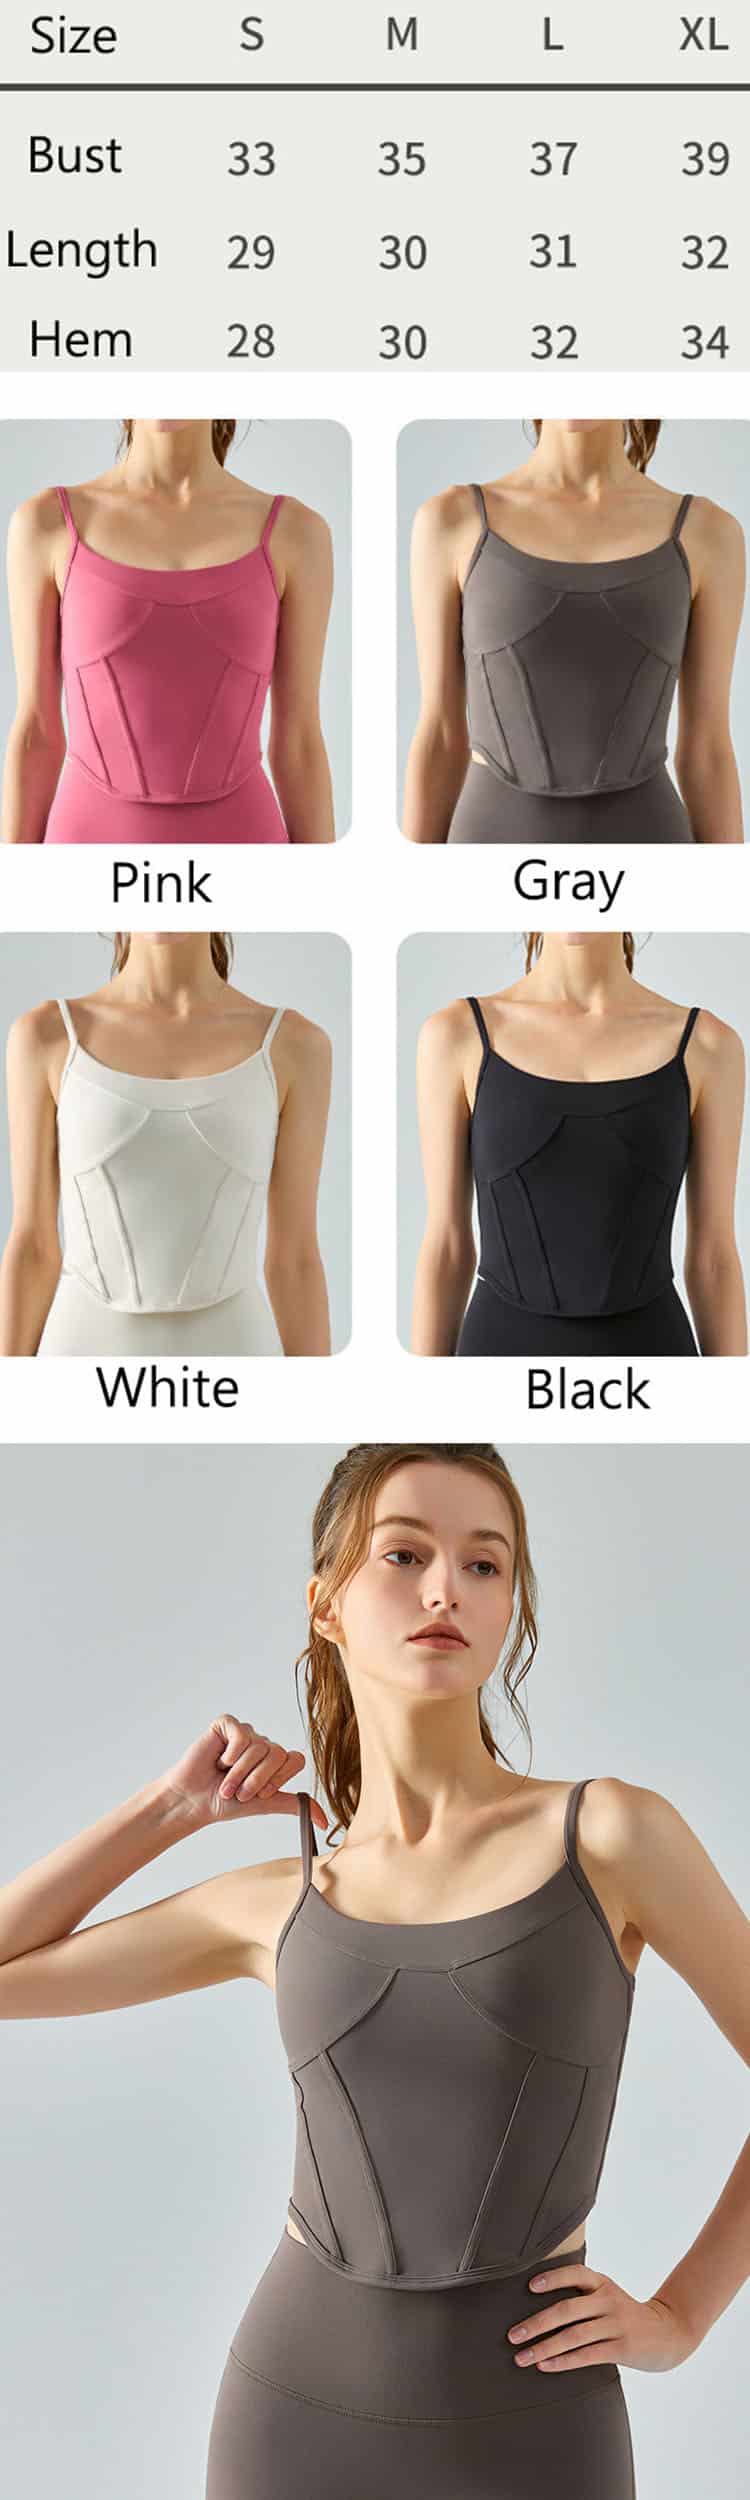 Slim-fit design is adopted to reveal sexy waistline and make it slim